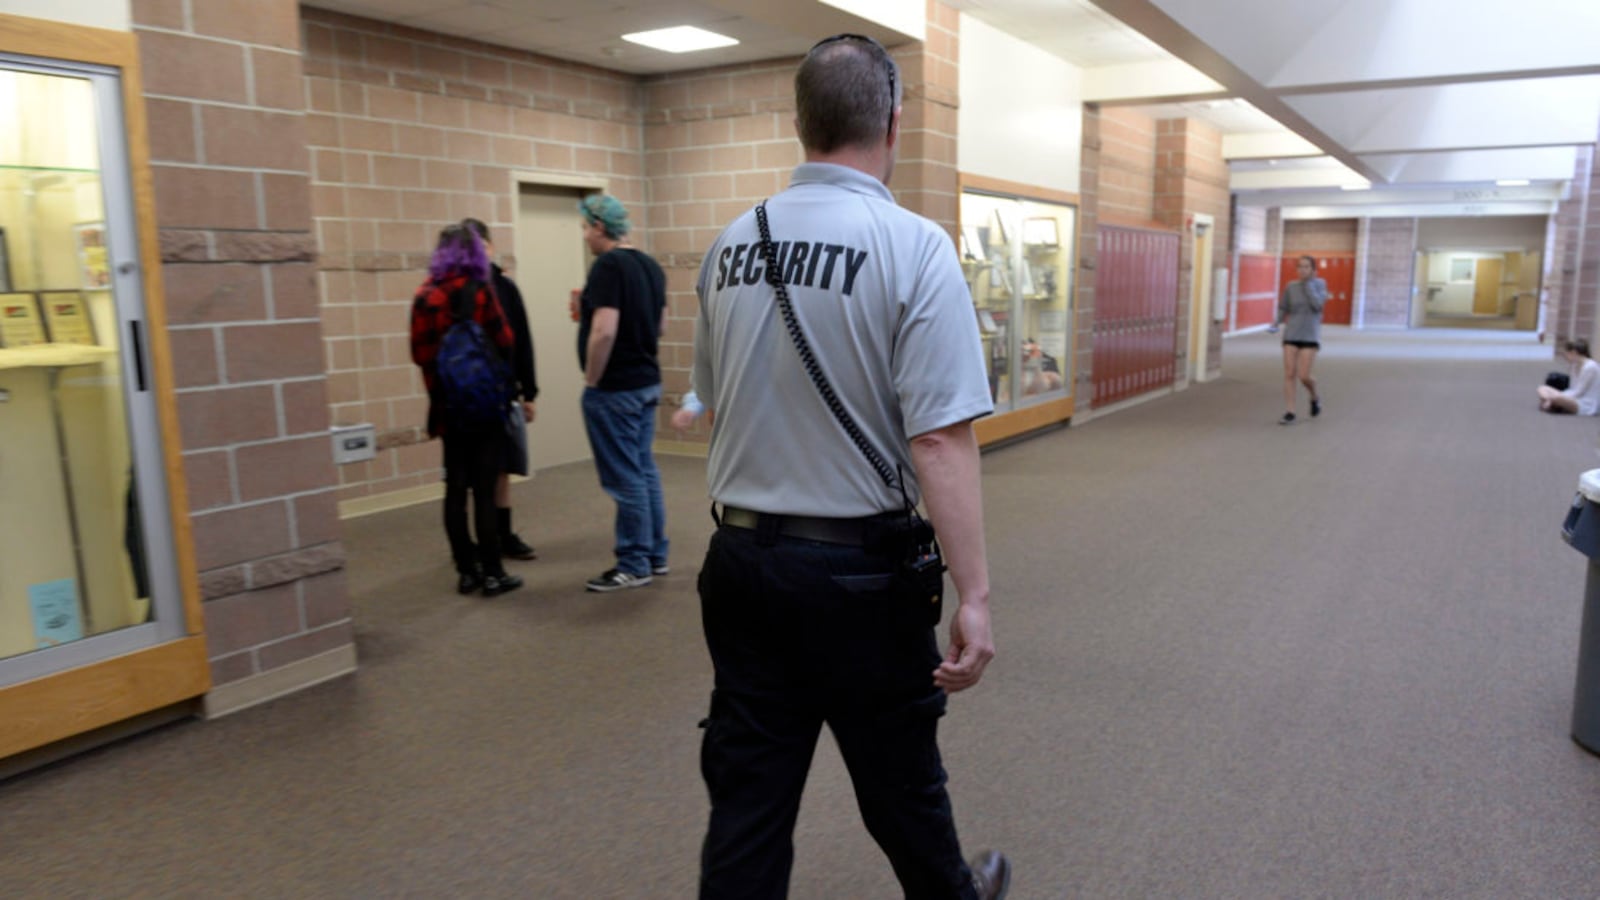 Douglas County School District security officer Ian Scott patrols the halls and checks in with students at Rock Canyon High School in 2017. (Photo by Kathryn Scott/The Denver Post via Getty Images)